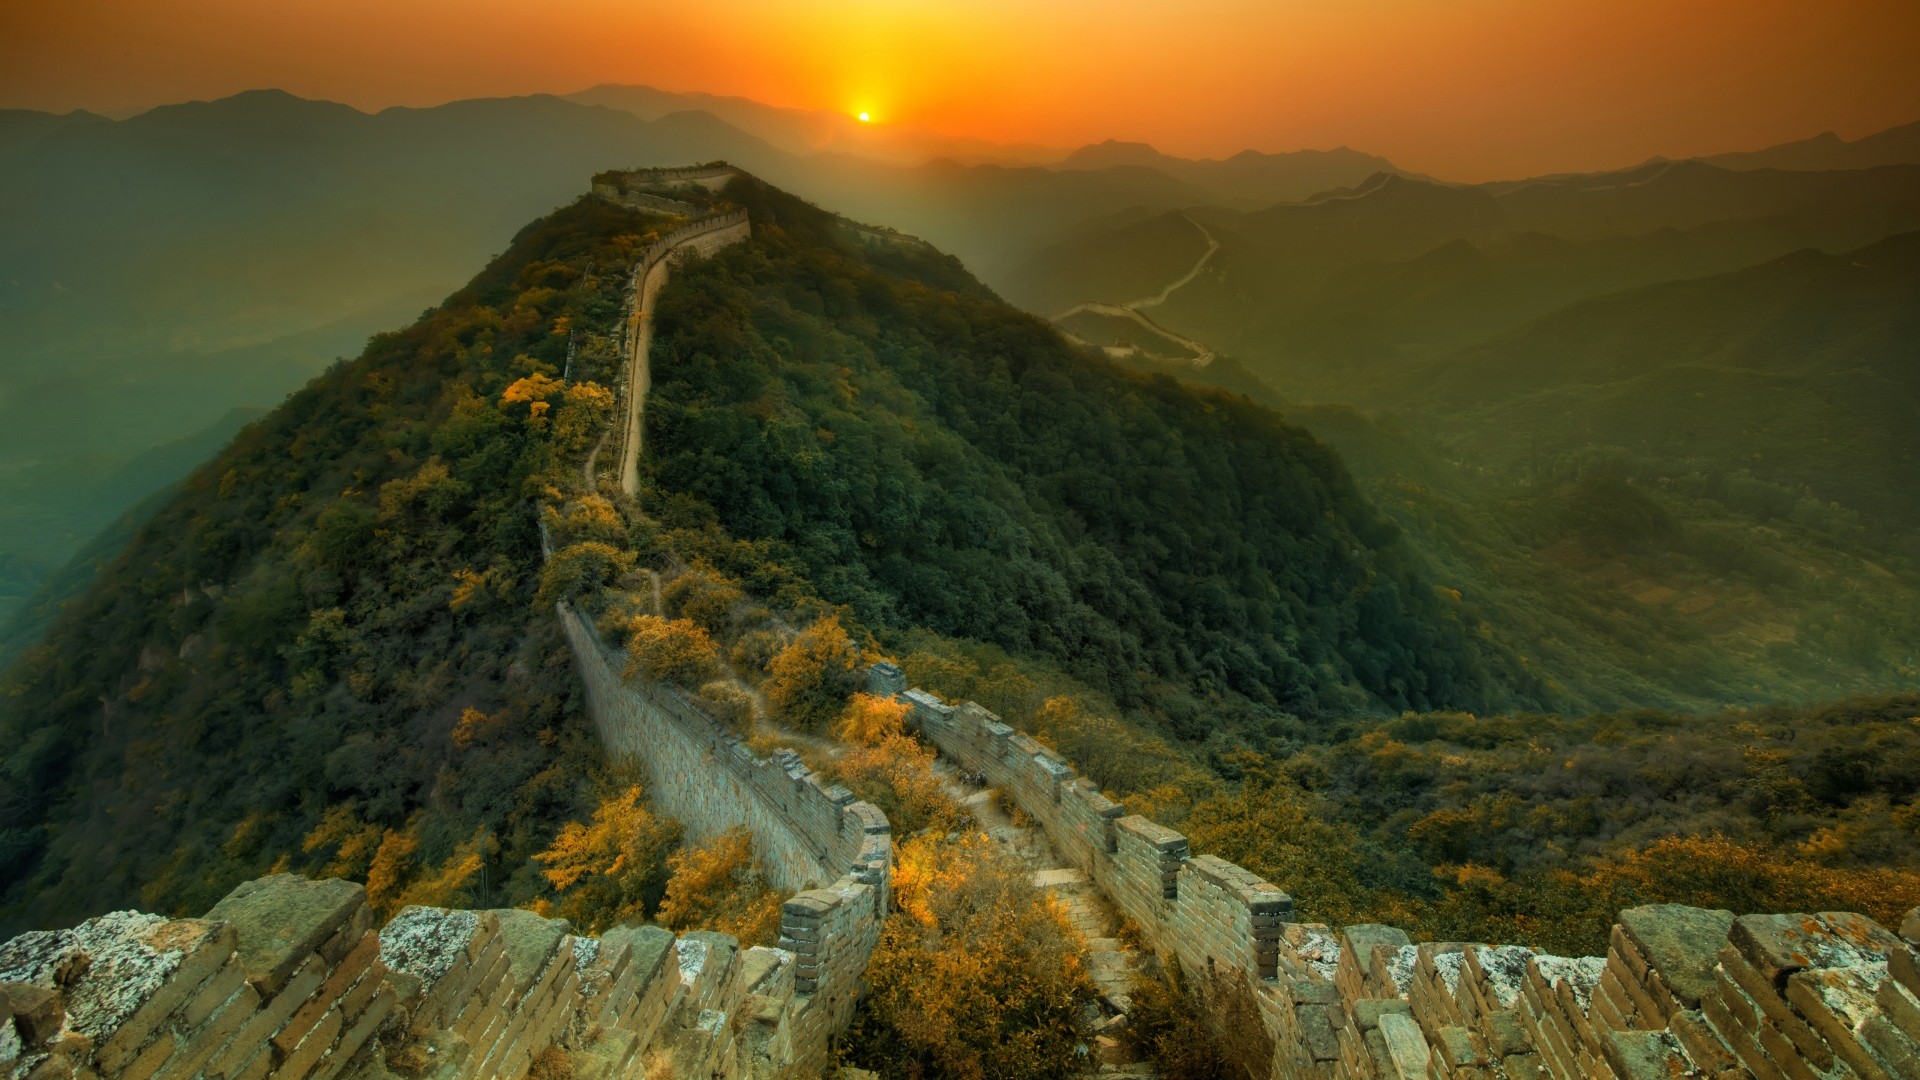 General 1920x1080 Great Wall of China architecture sunset hills nature Asia China sunlight landscape